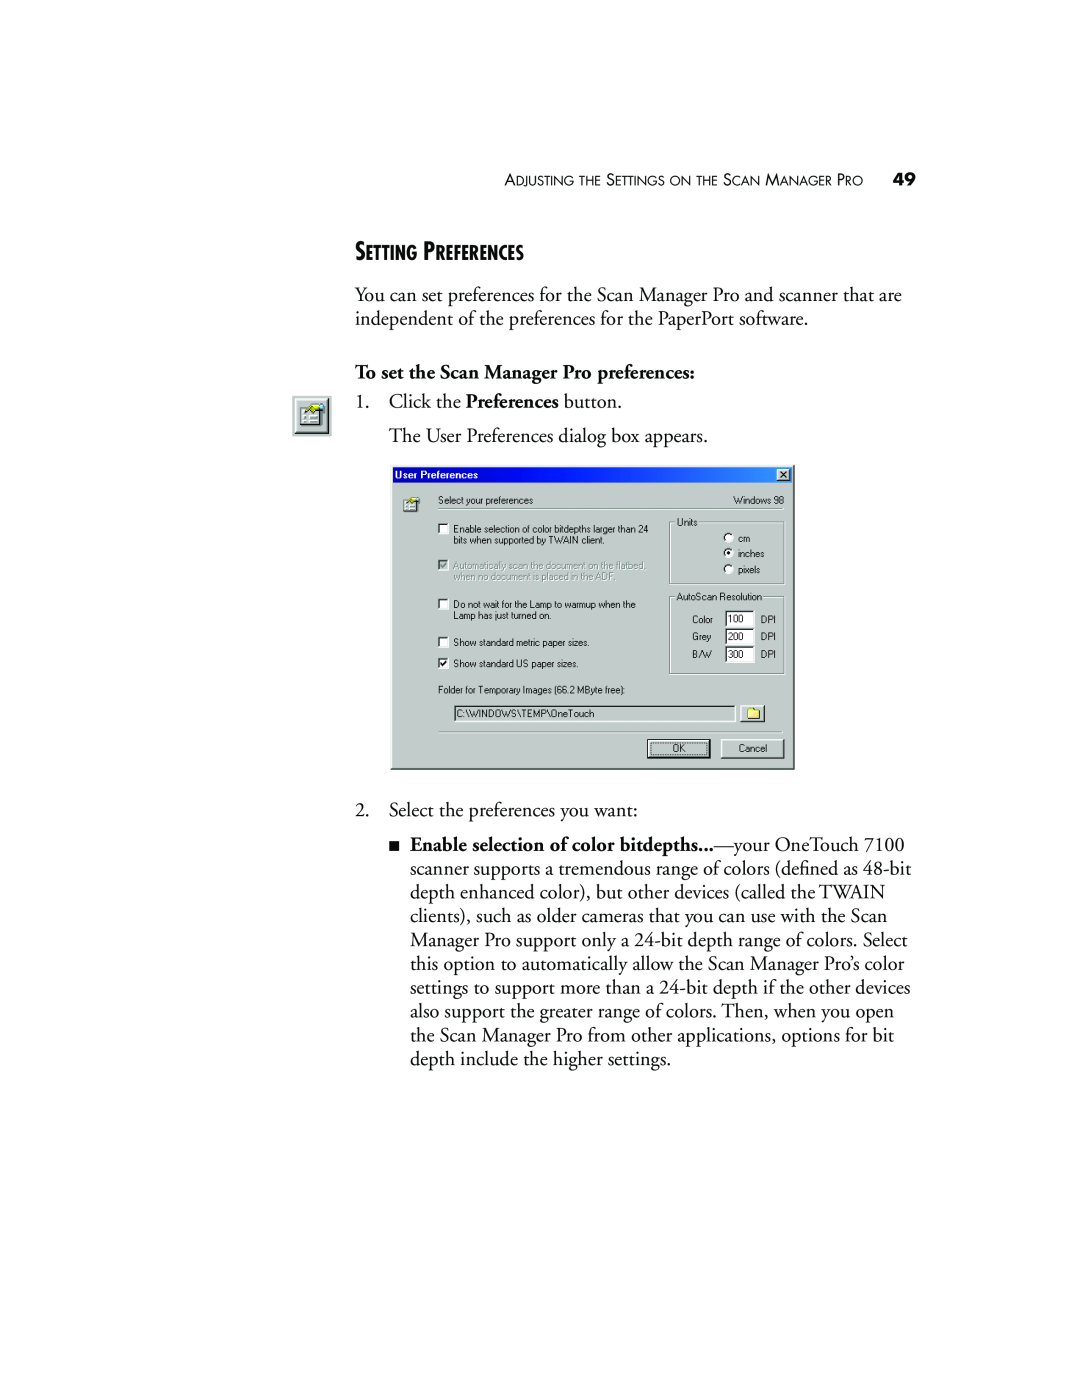 Visioneer 7100 manual Setting Preferences, To set the Scan Manager Pro preferences 